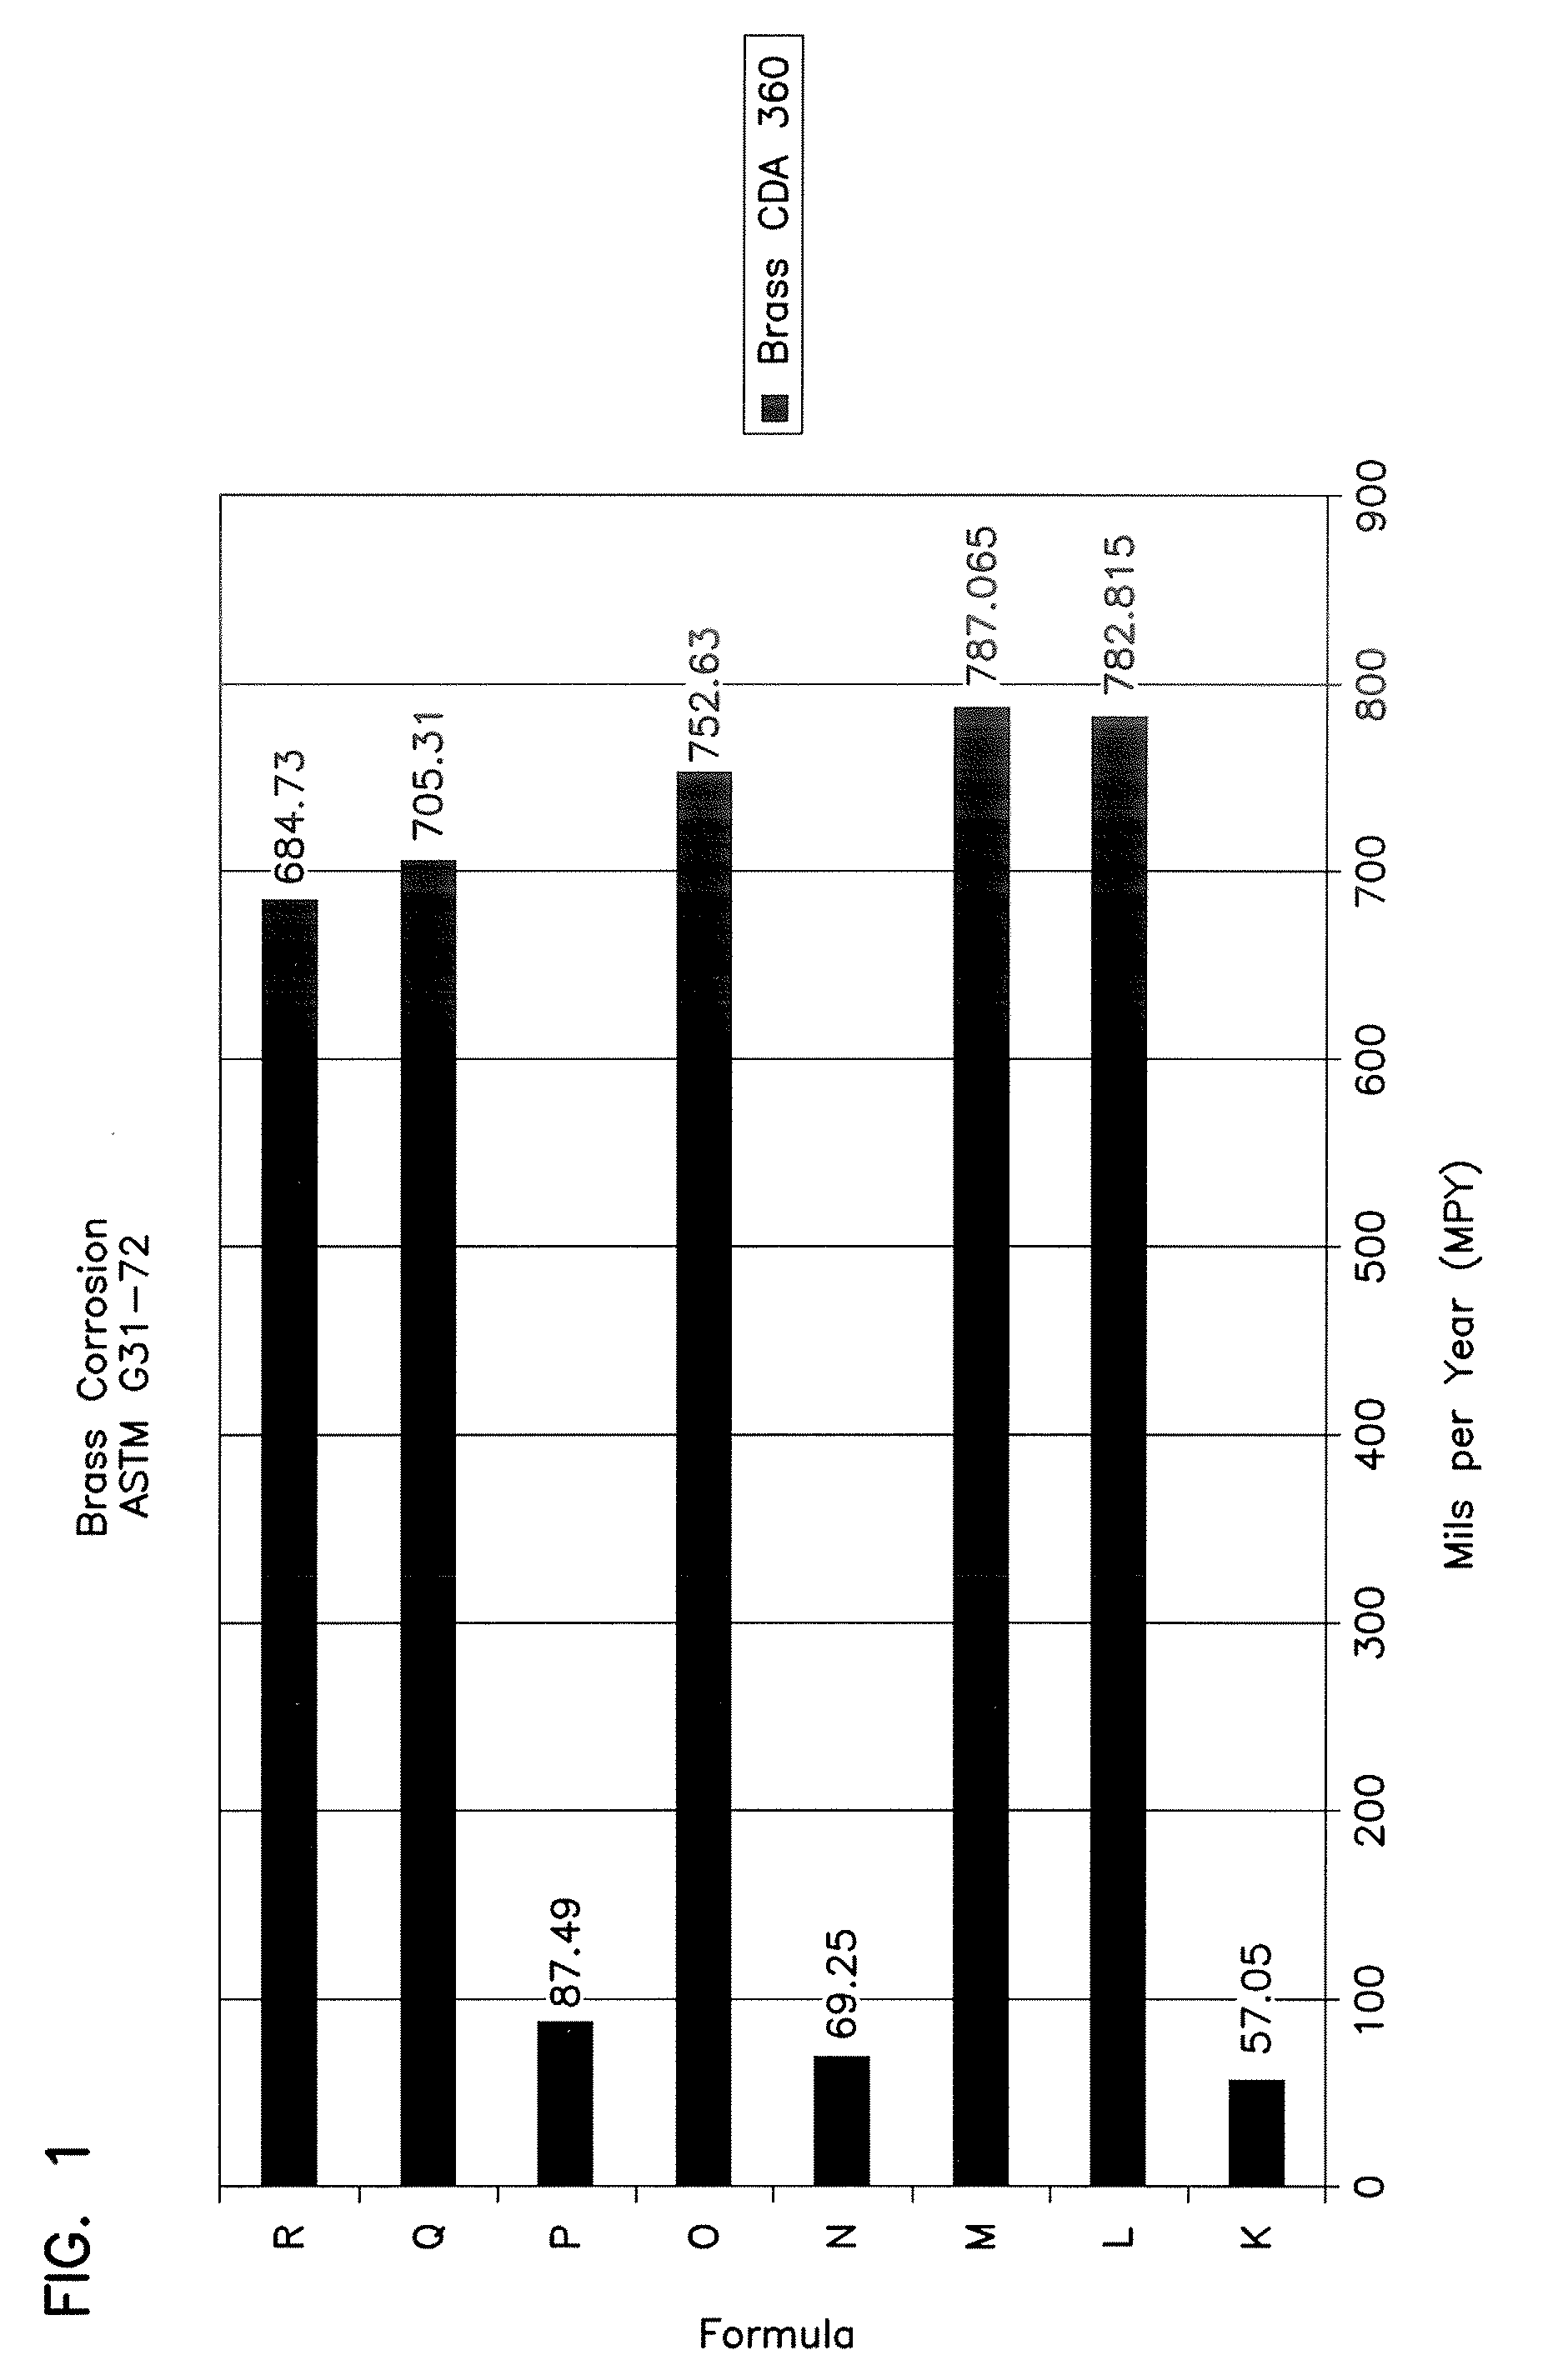 Shelf stable, reduced corrosion, ready to use peroxycarboxylic acid antimicrobial compositions